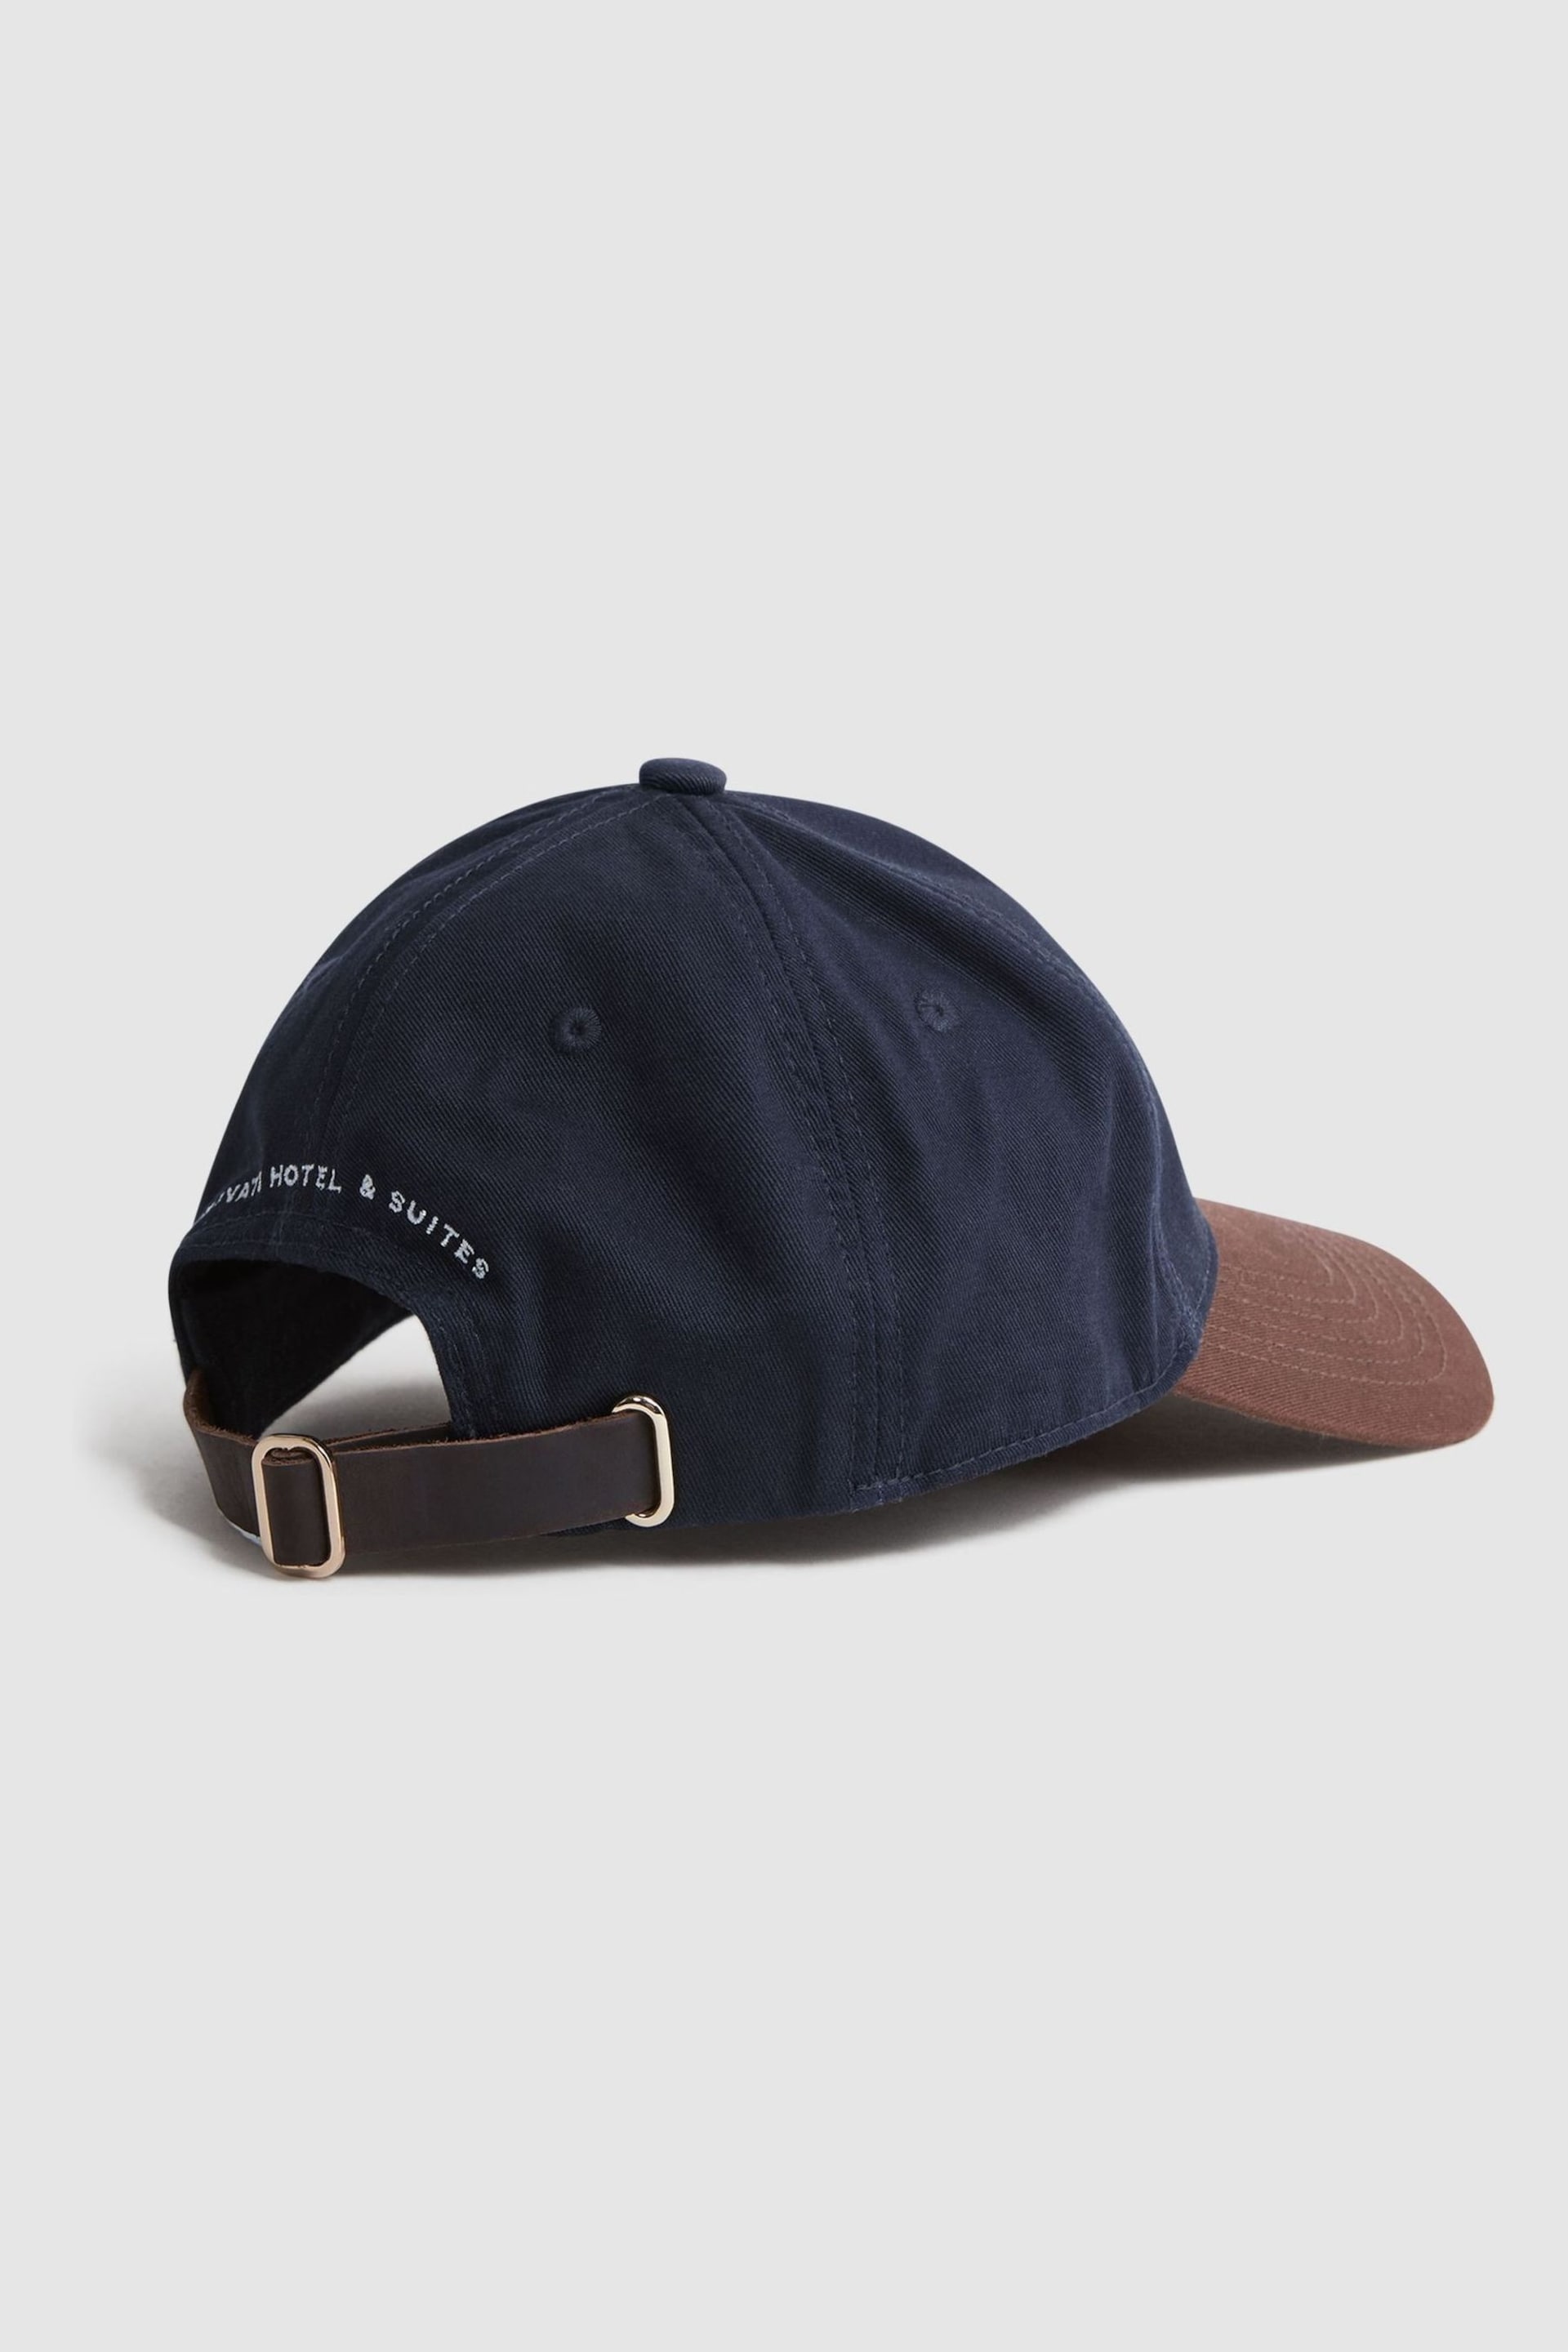 Reiss Navy/Tobacco Palermo Reiss | Ché Embroidered Baseball Cap - Image 4 of 4